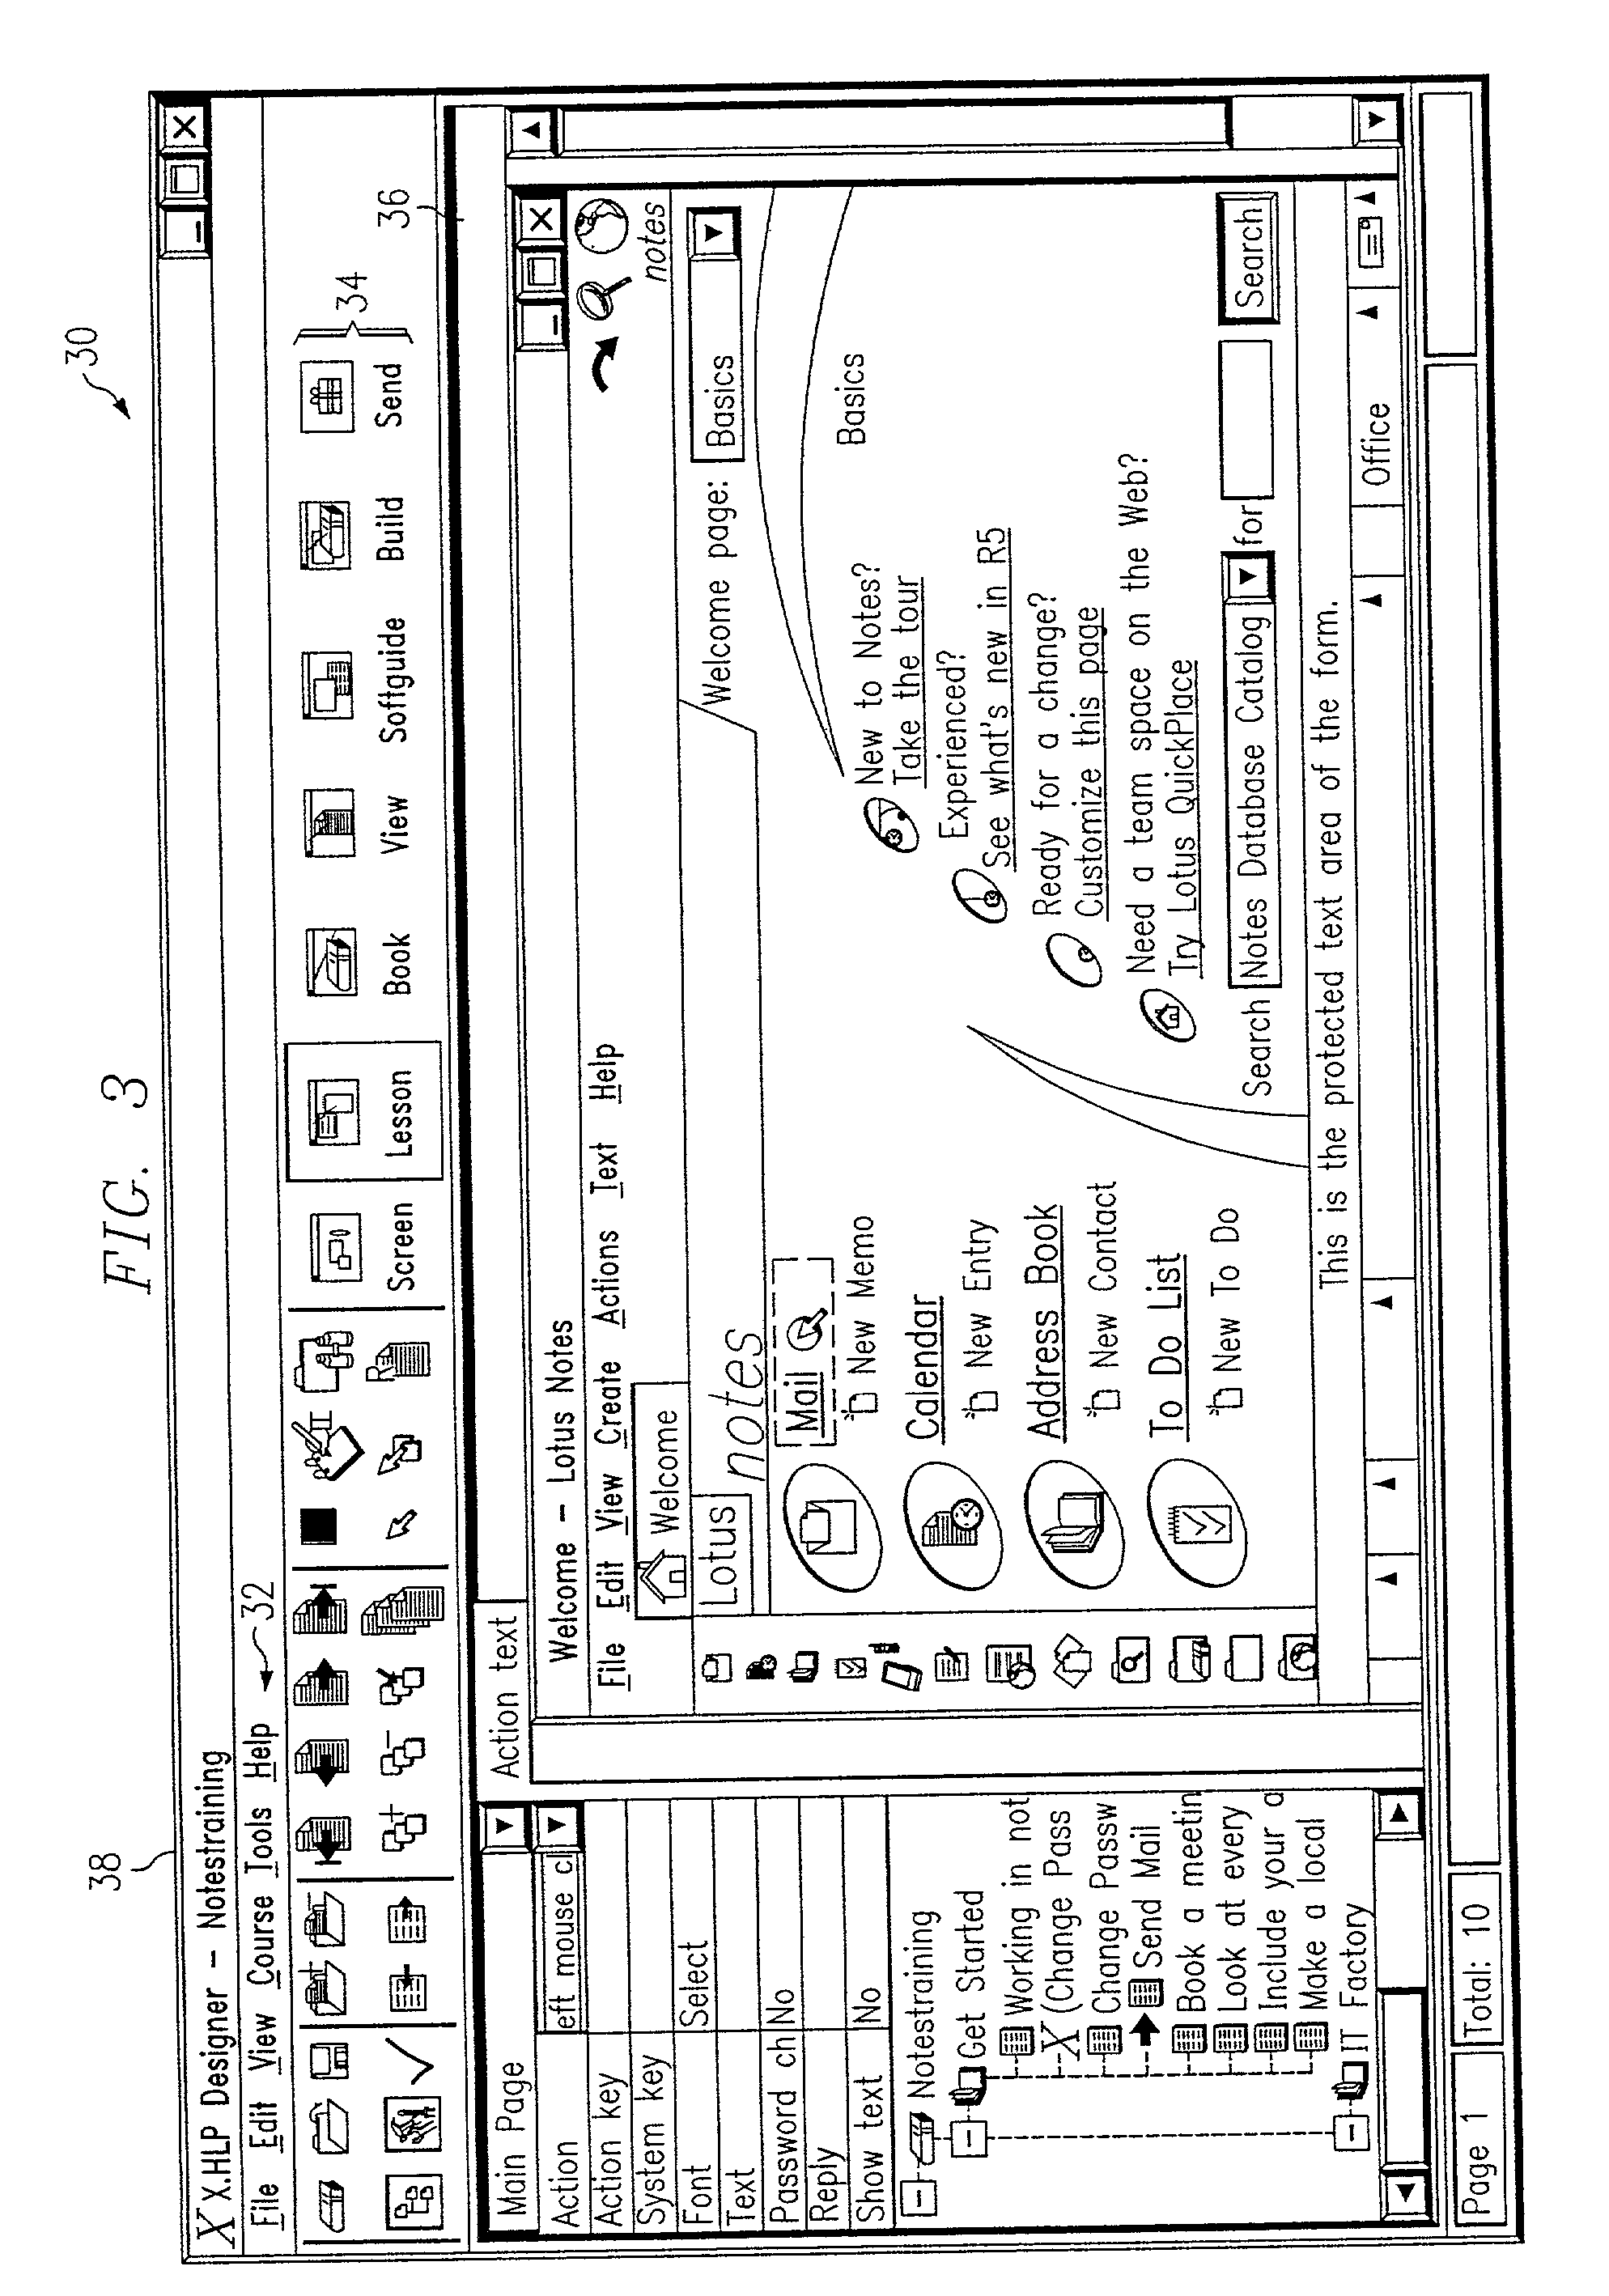 Method of reducing the size of a file and a data processing system readable medium for performing the method